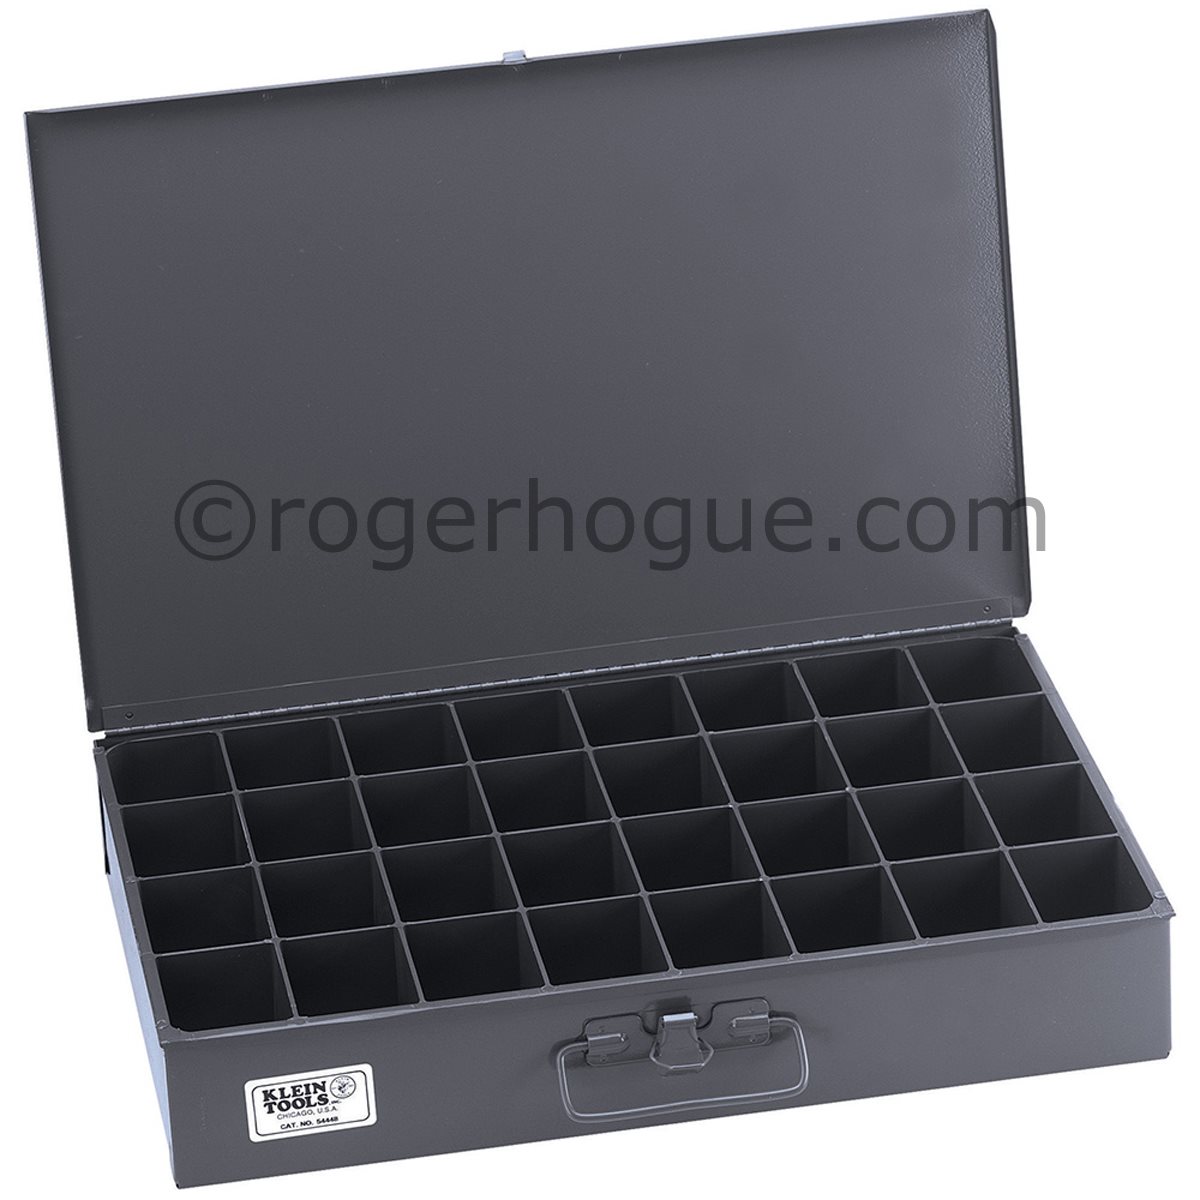 STORAGE BOX WITH 32 COMPARTMENTS